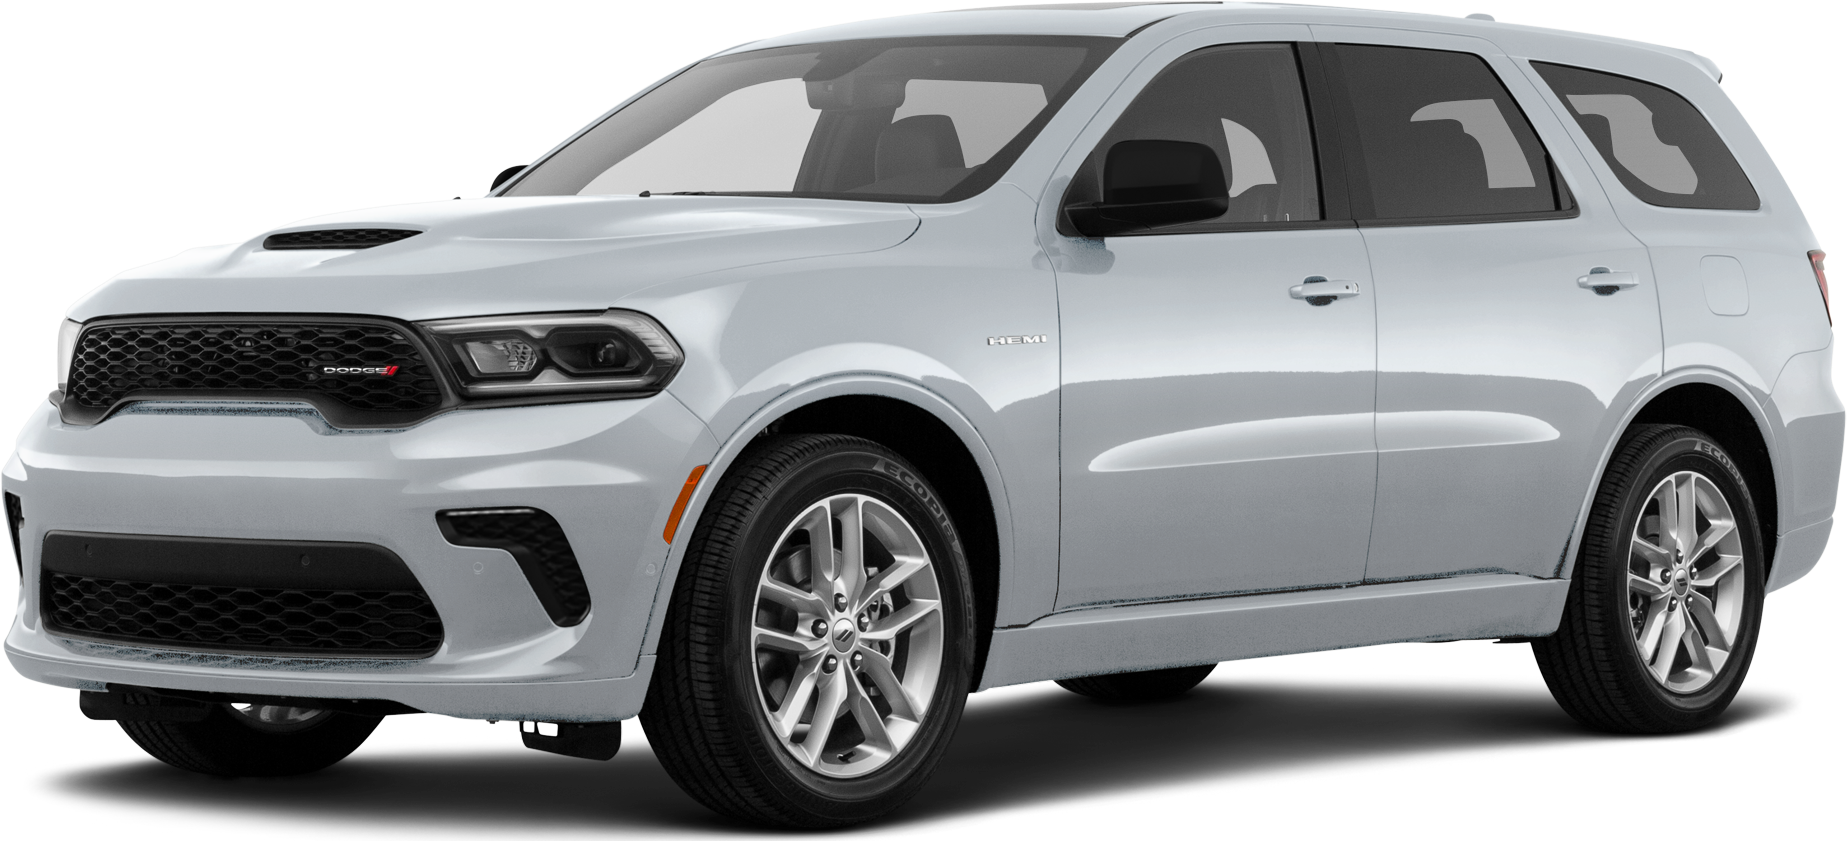 2024 Dodge Durango Price, Pictures, Release Date & More | Kelley Blue Book